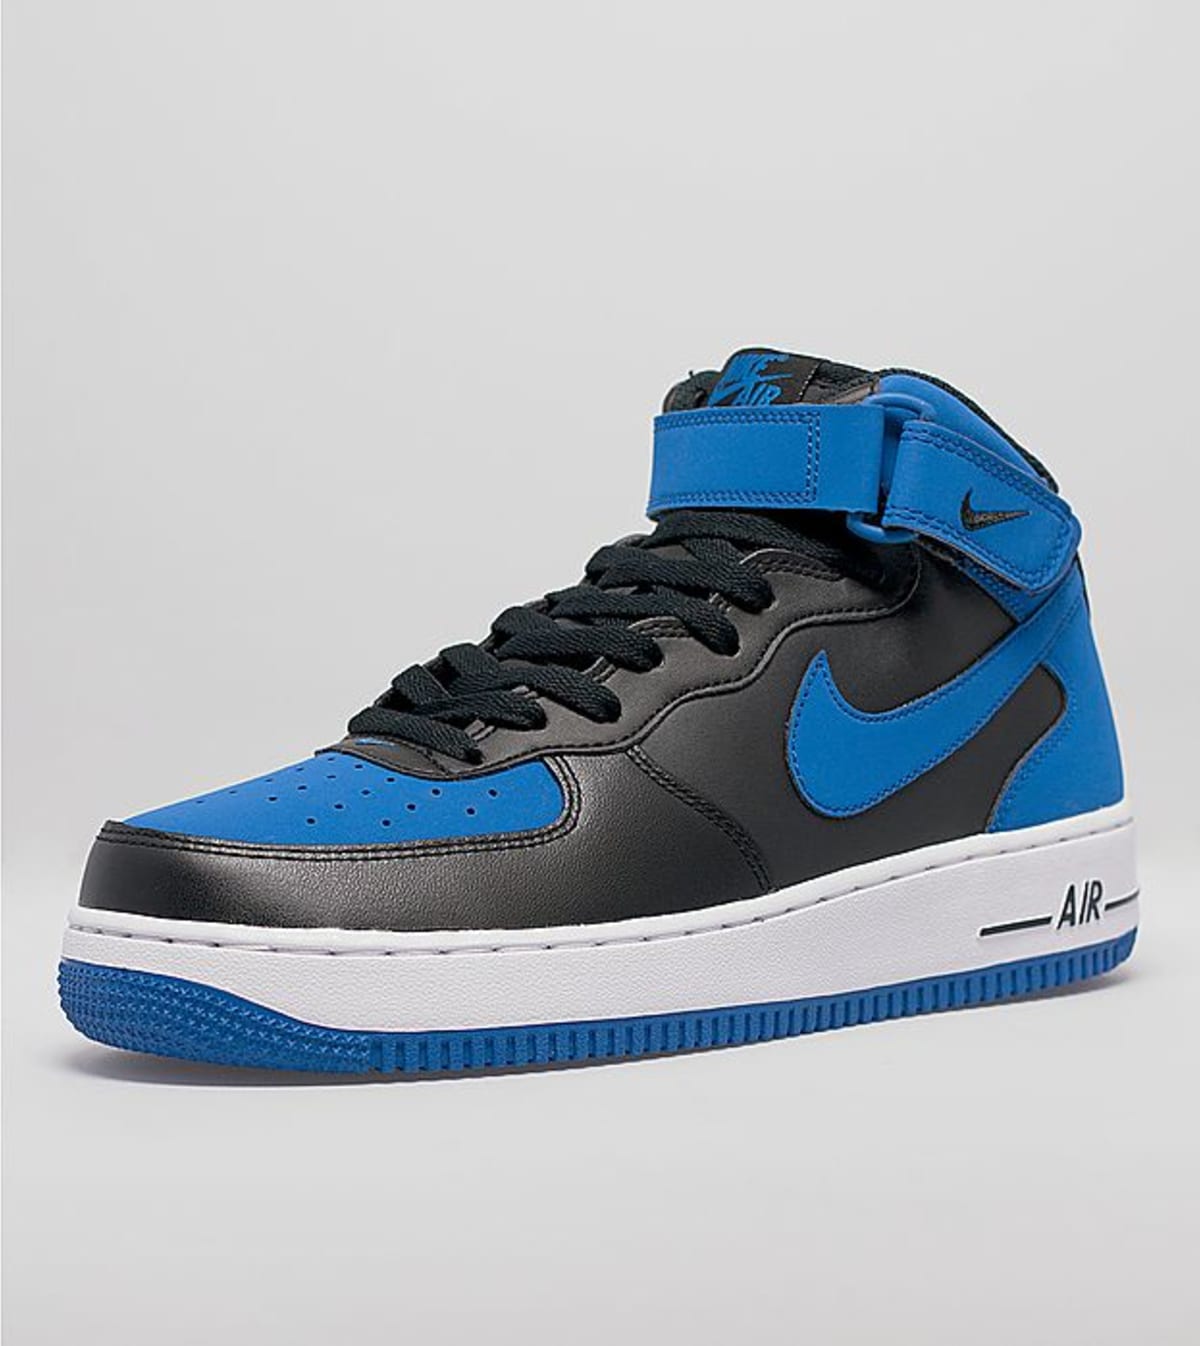 Kicks of the Day: Nike Air Force 1 Mid "Black/Royal Blue" | Complex